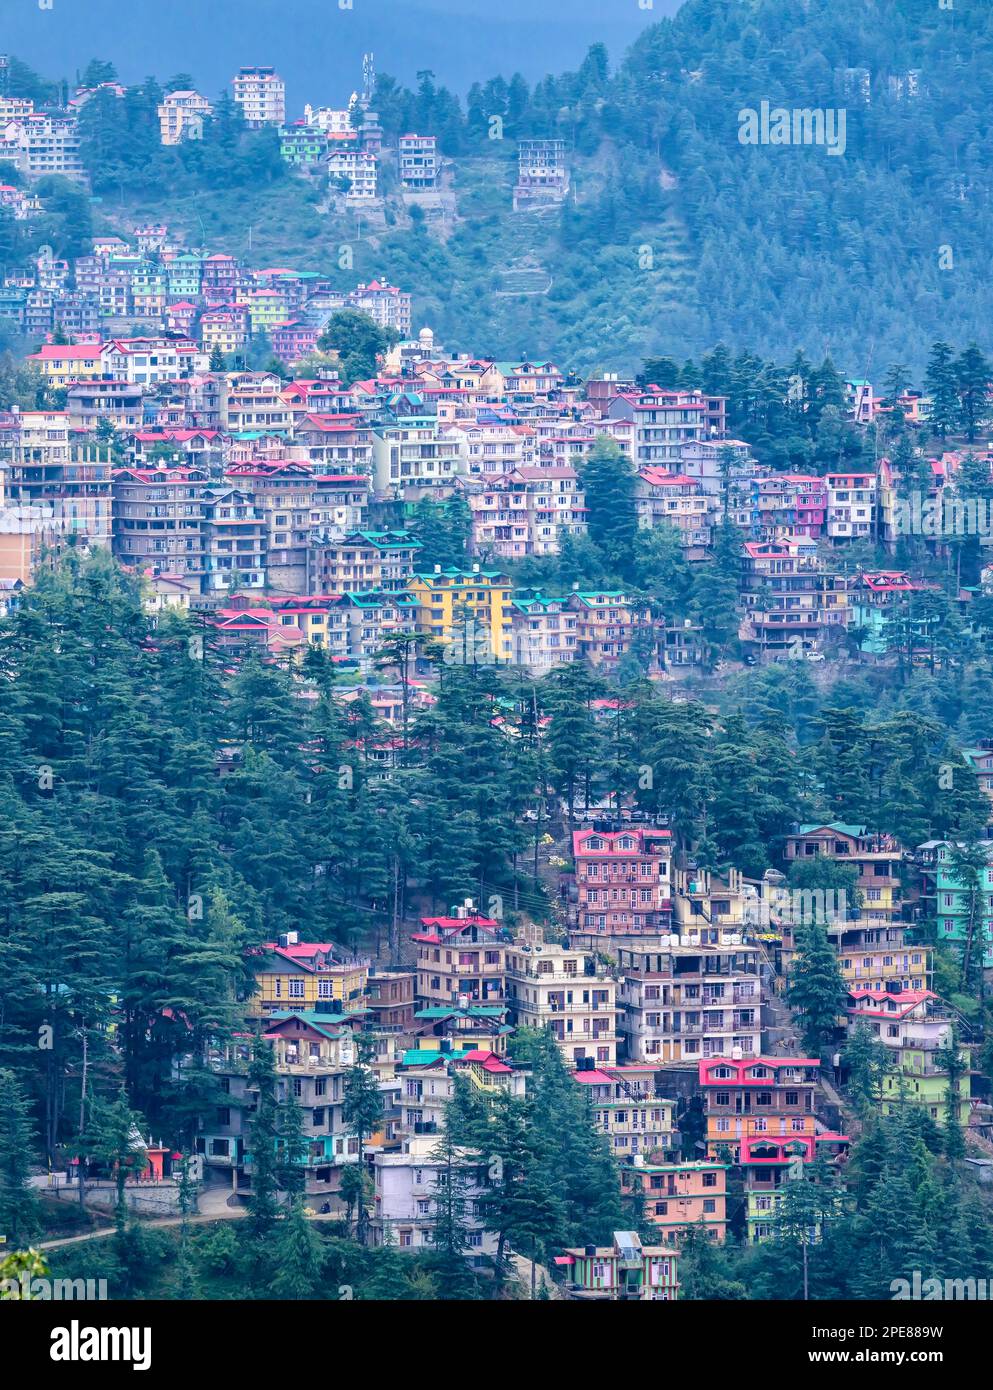 Looking out from the Elysium Hotel at the concerning urban sprawl on the mountainsides in Shimla Stock Photo